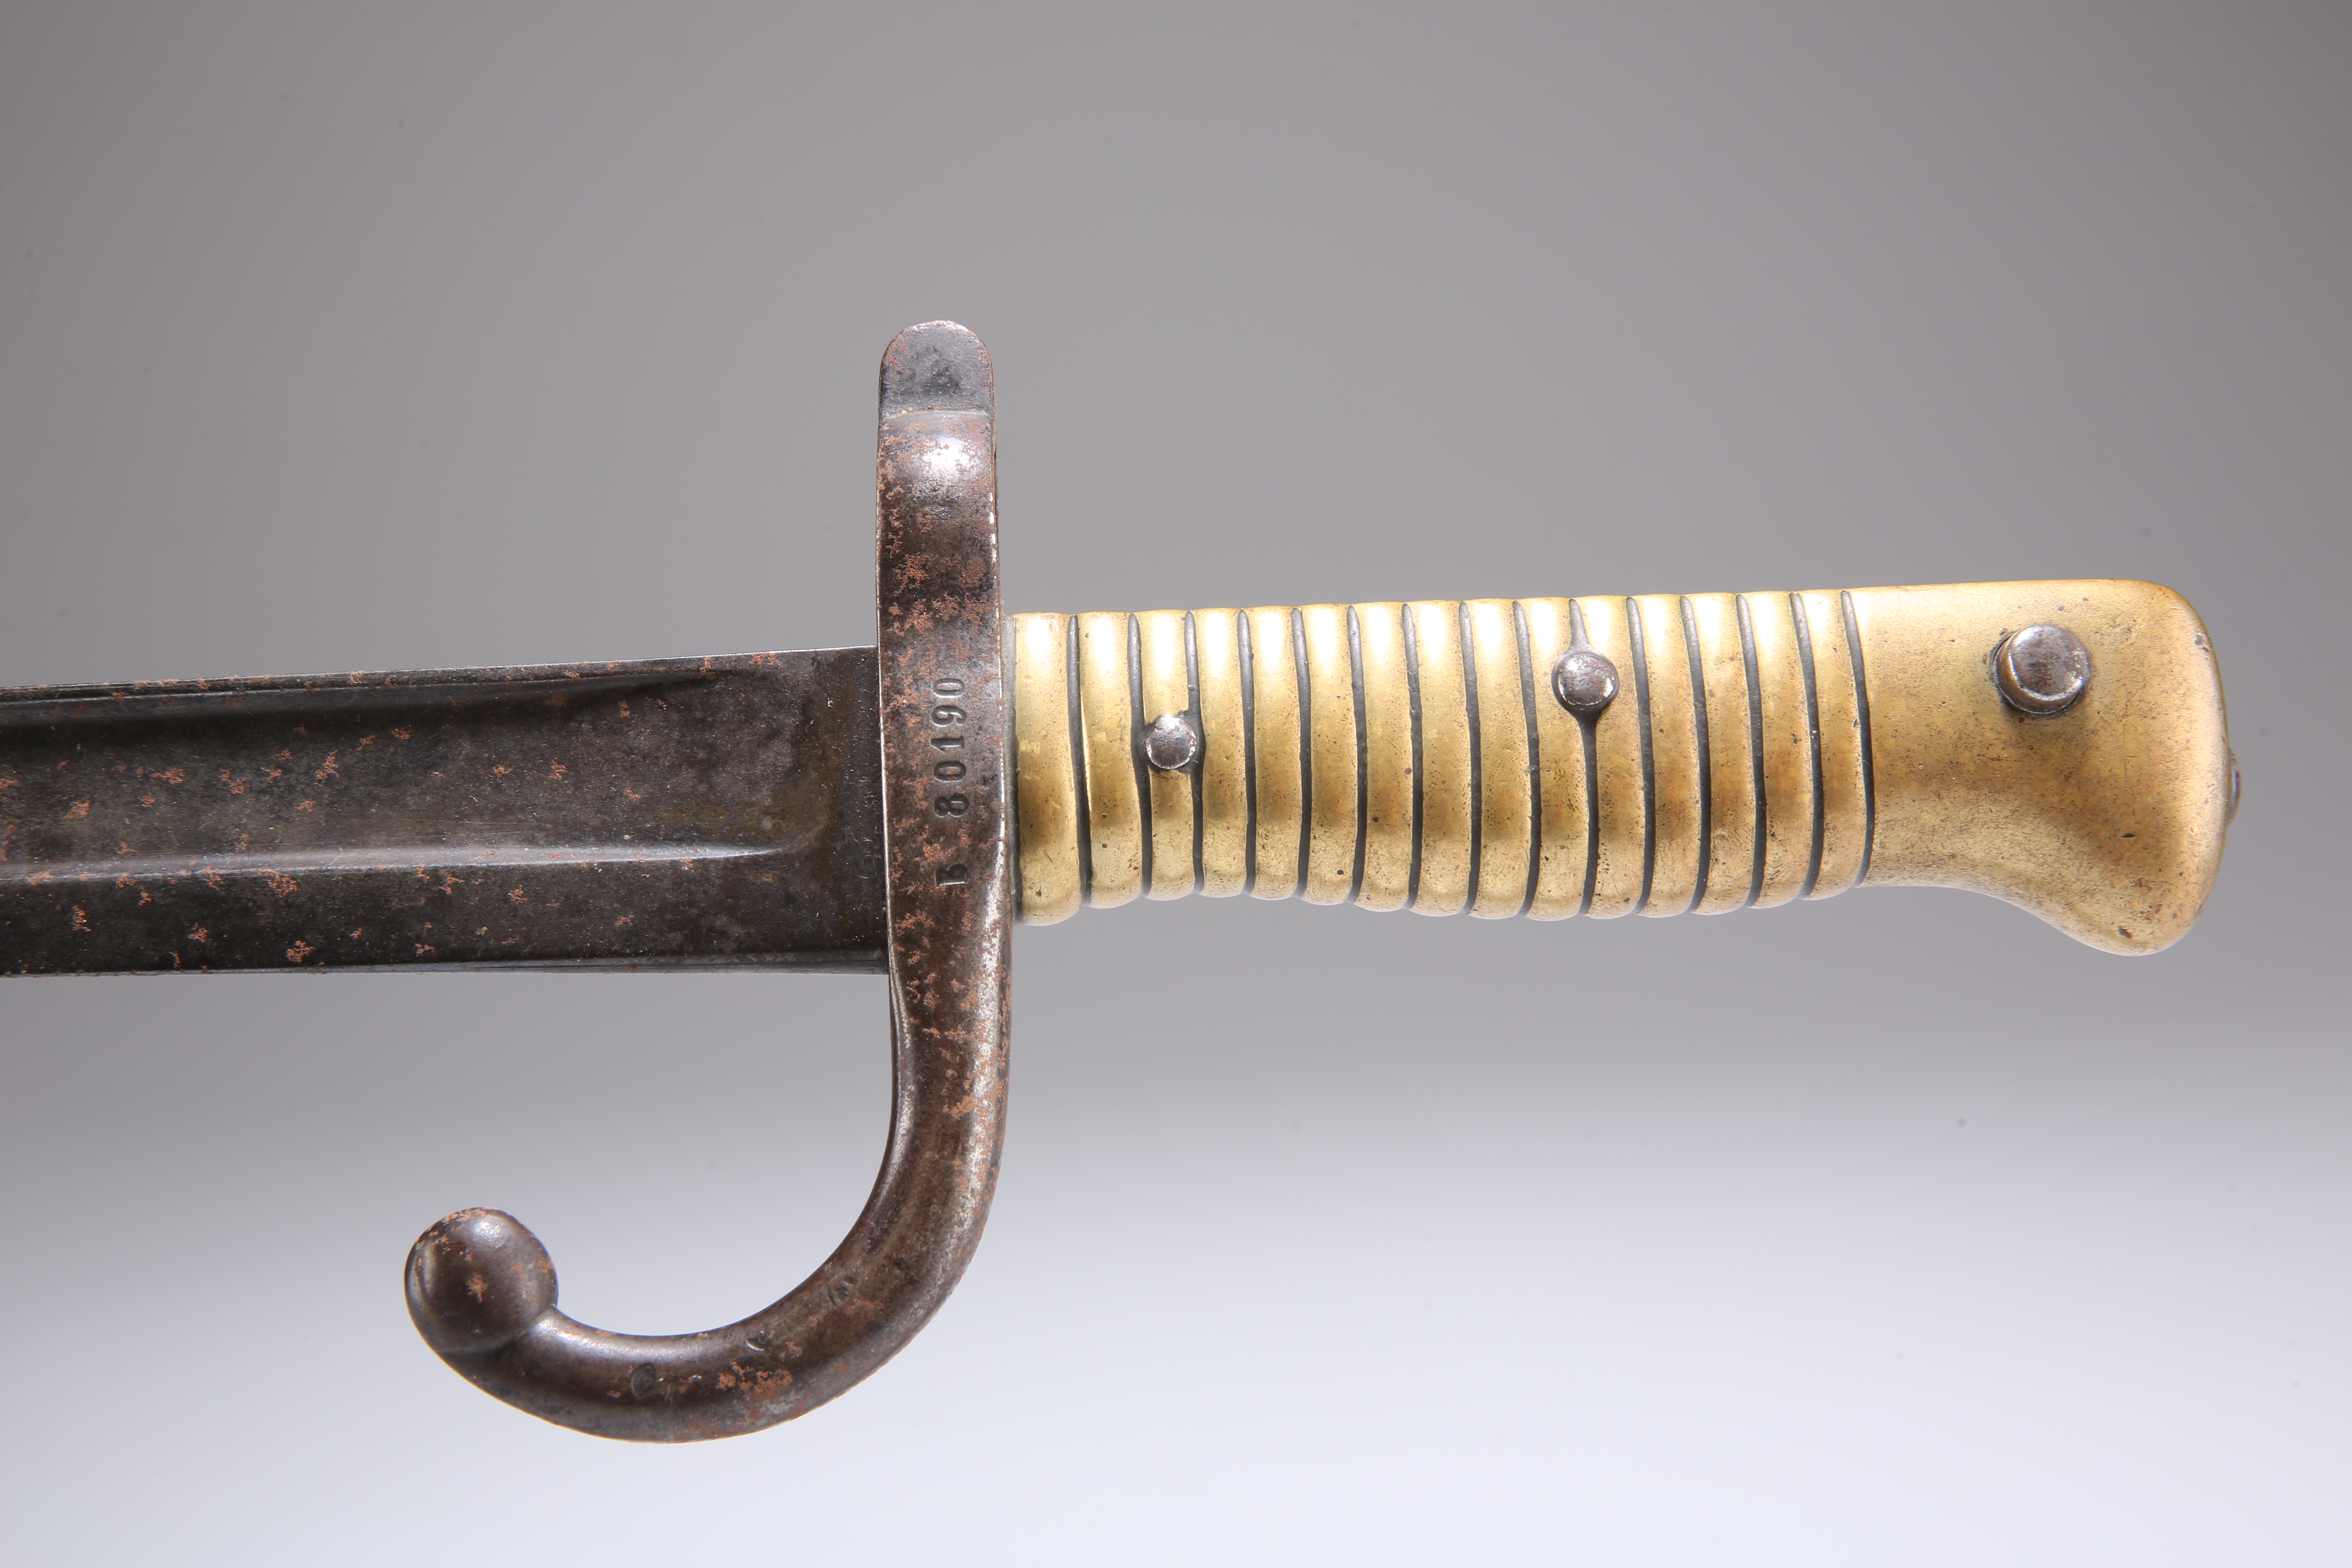 A FRENCH 19TH CENTURY INFANTRY BAYONET - Image 2 of 3